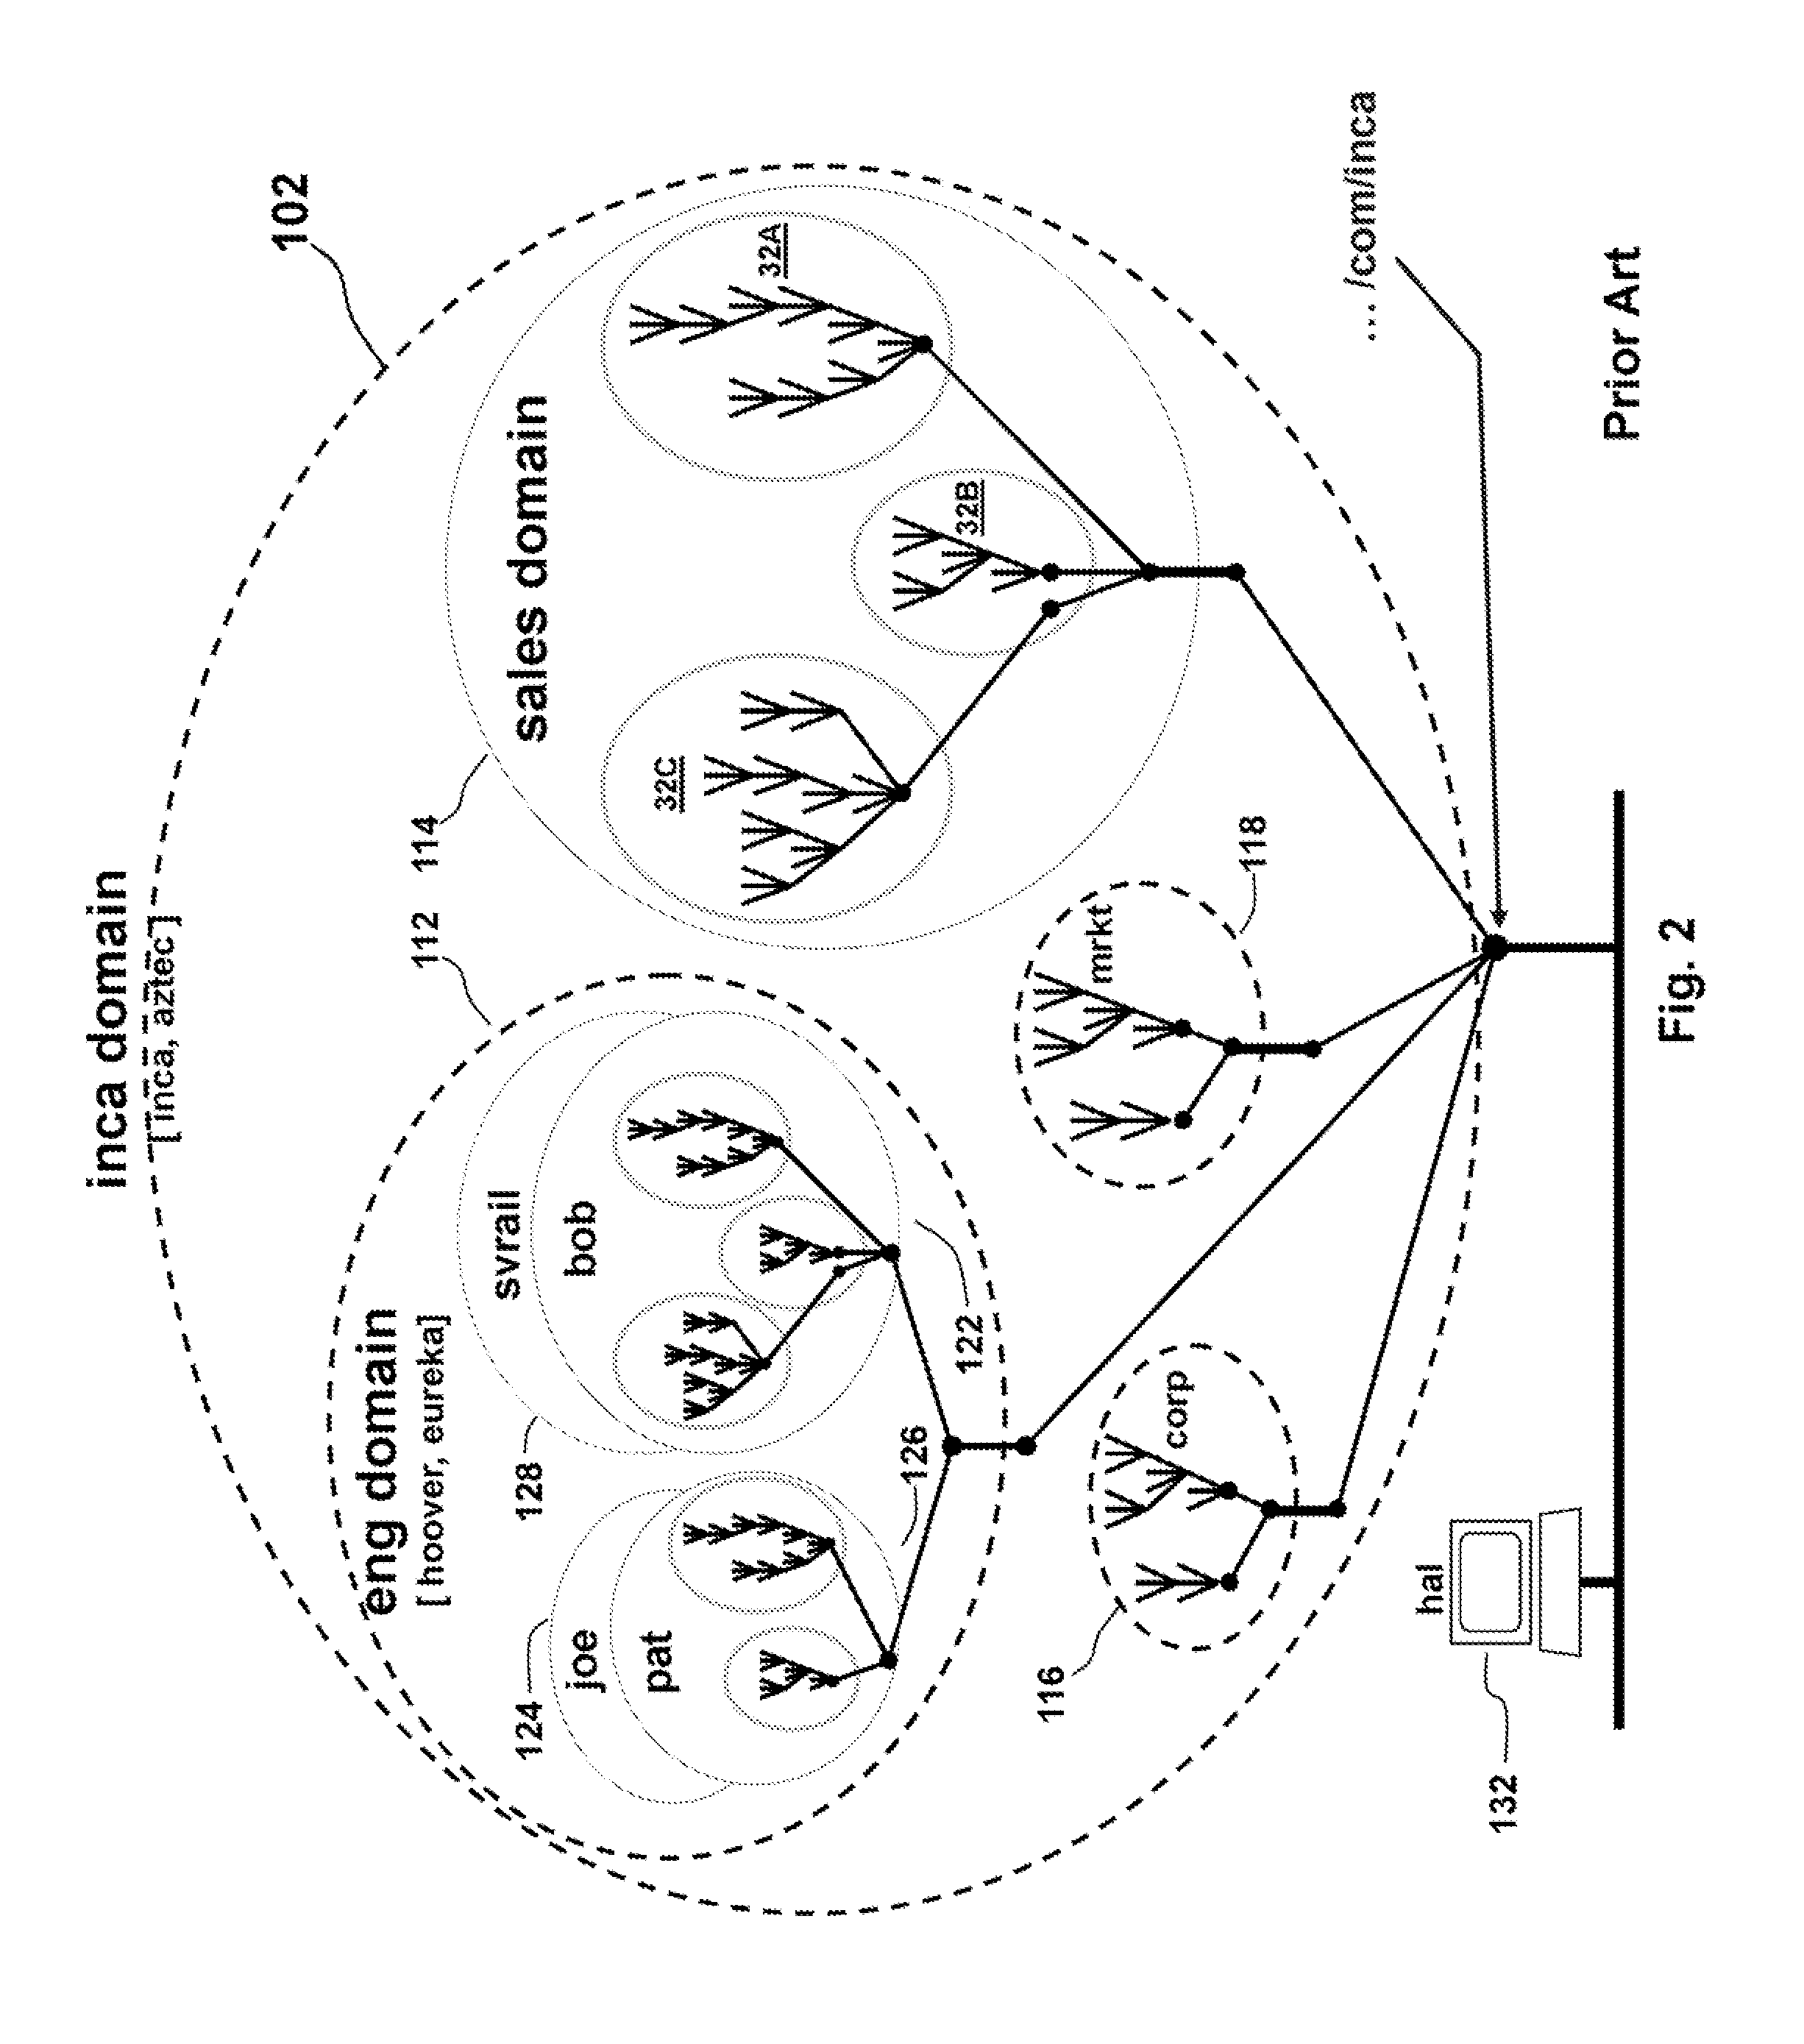 Distributed file system consistency mechanism extension for enabling internet video broadcasting